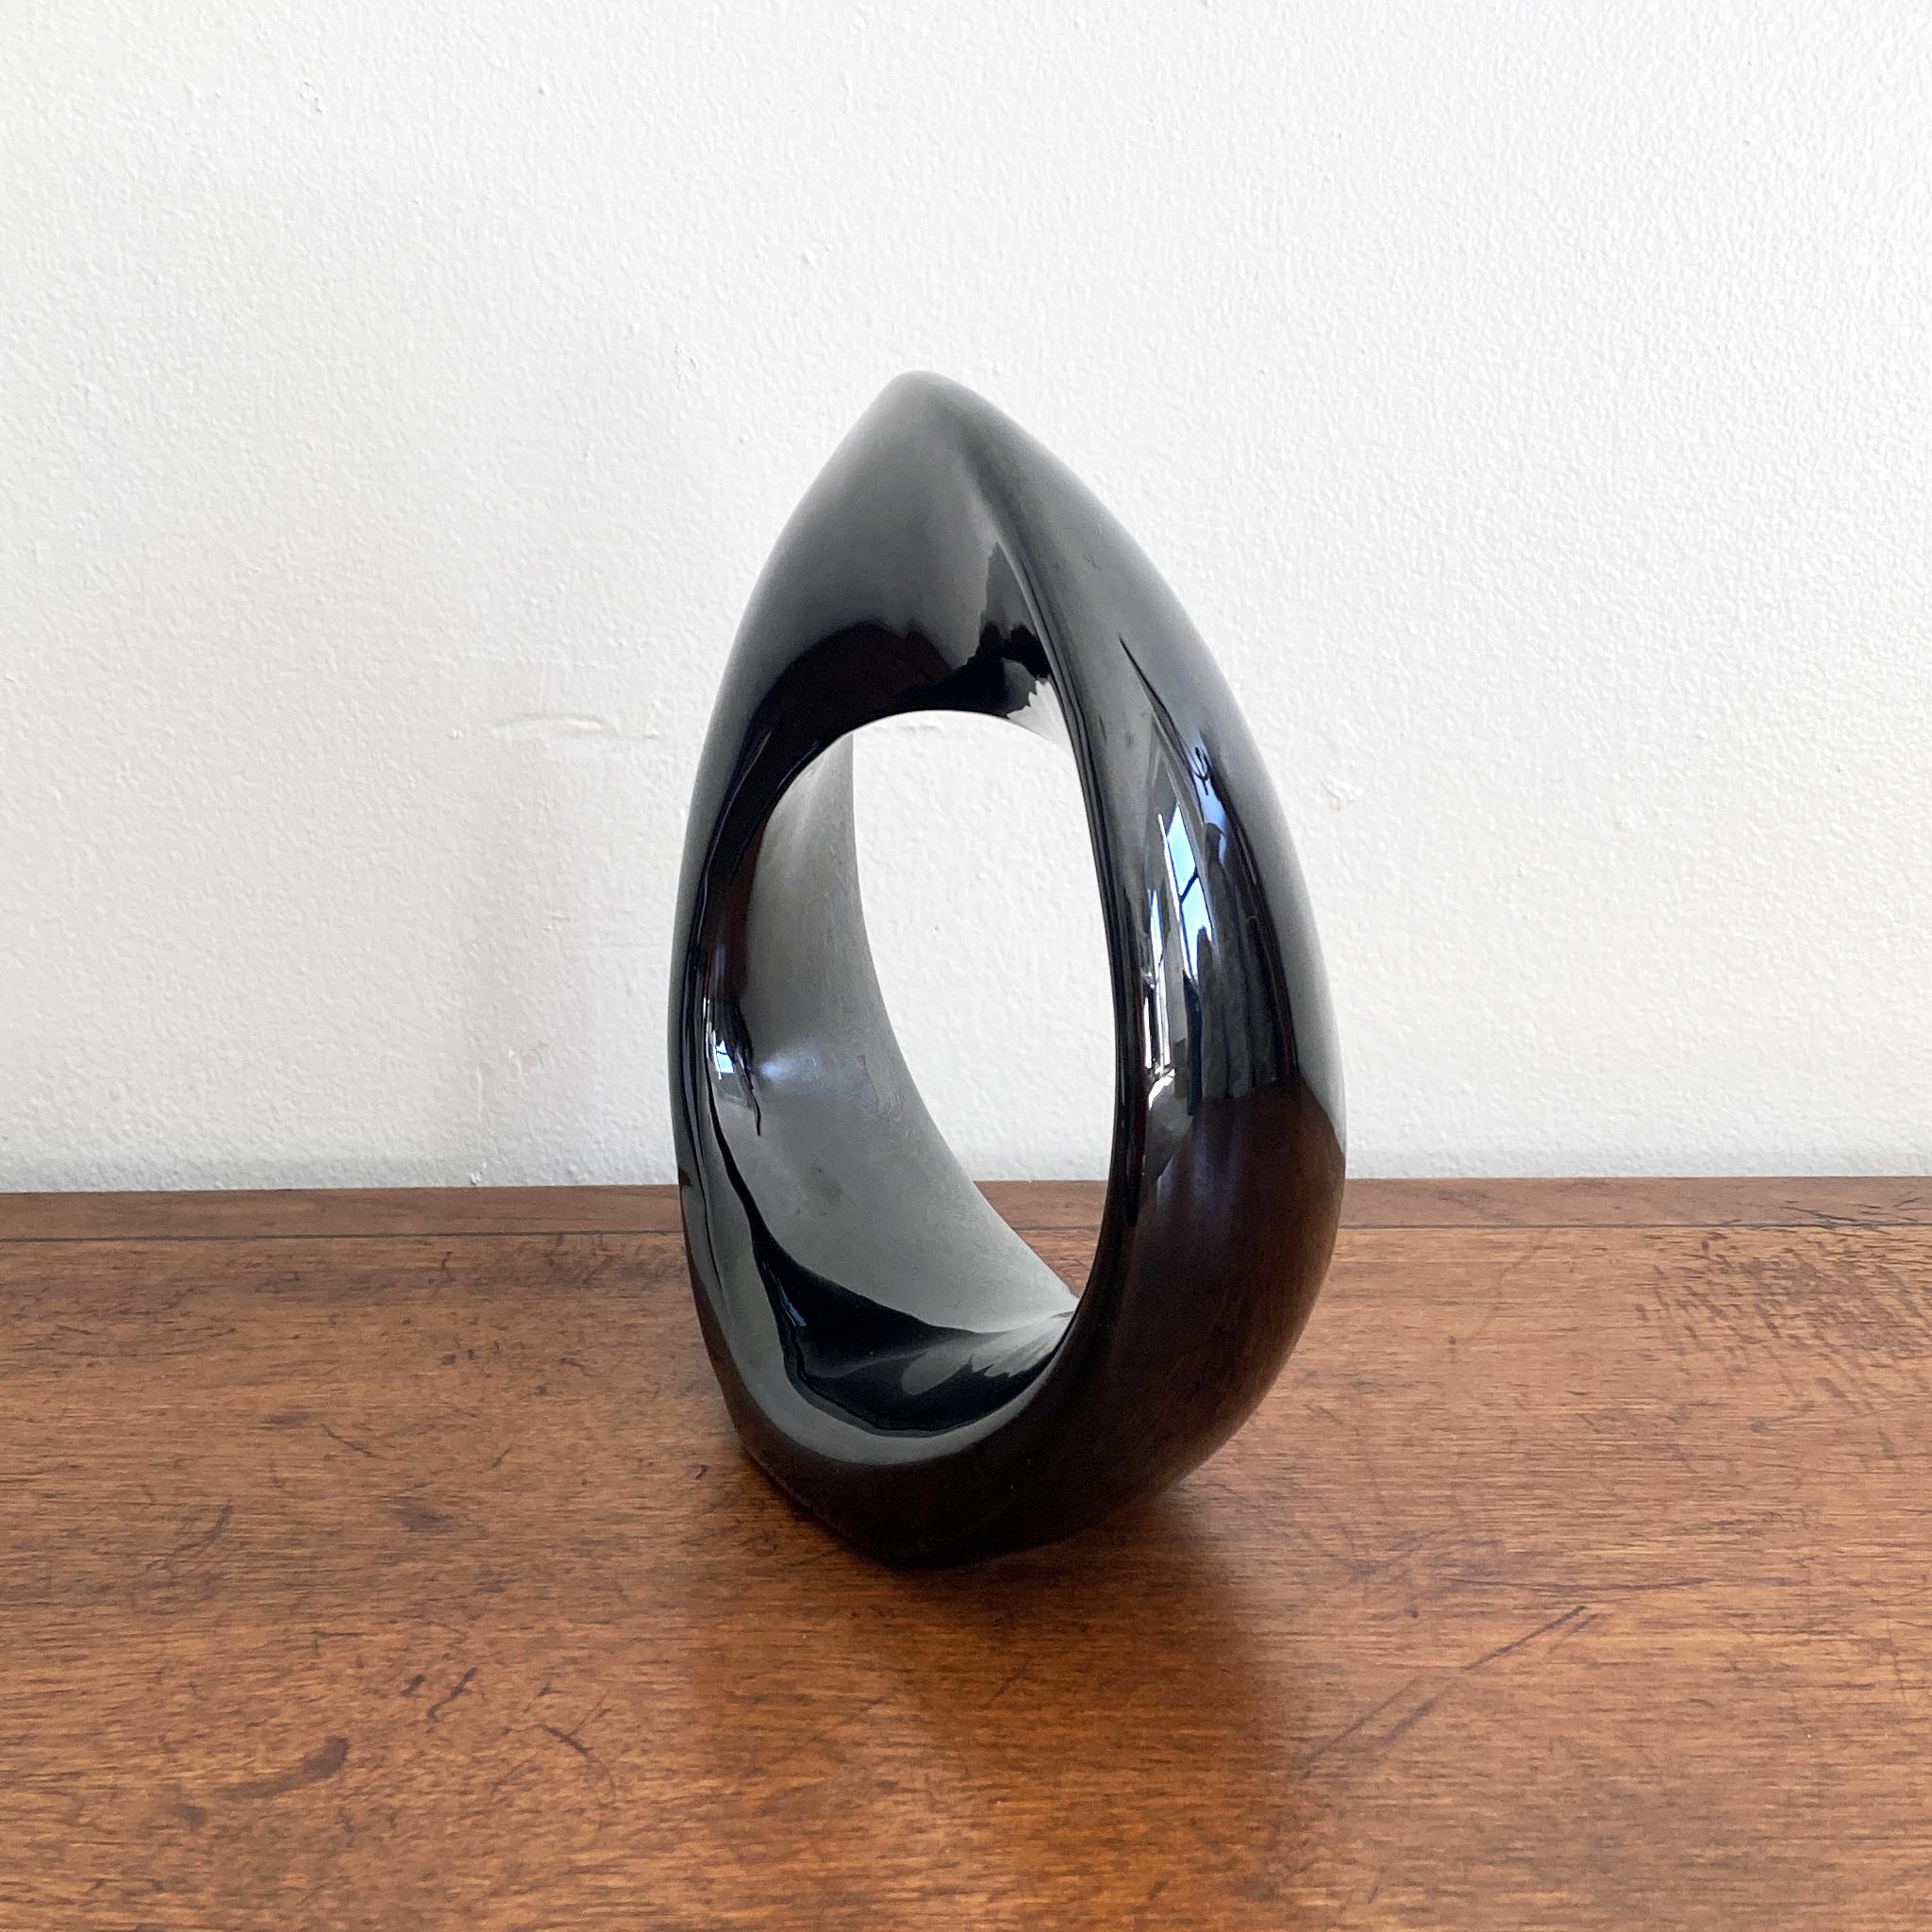 Haeger Gloss Black Postmodern Abstract Circular Twisted Orb Sculpture In Good Condition For Sale In New York, NY